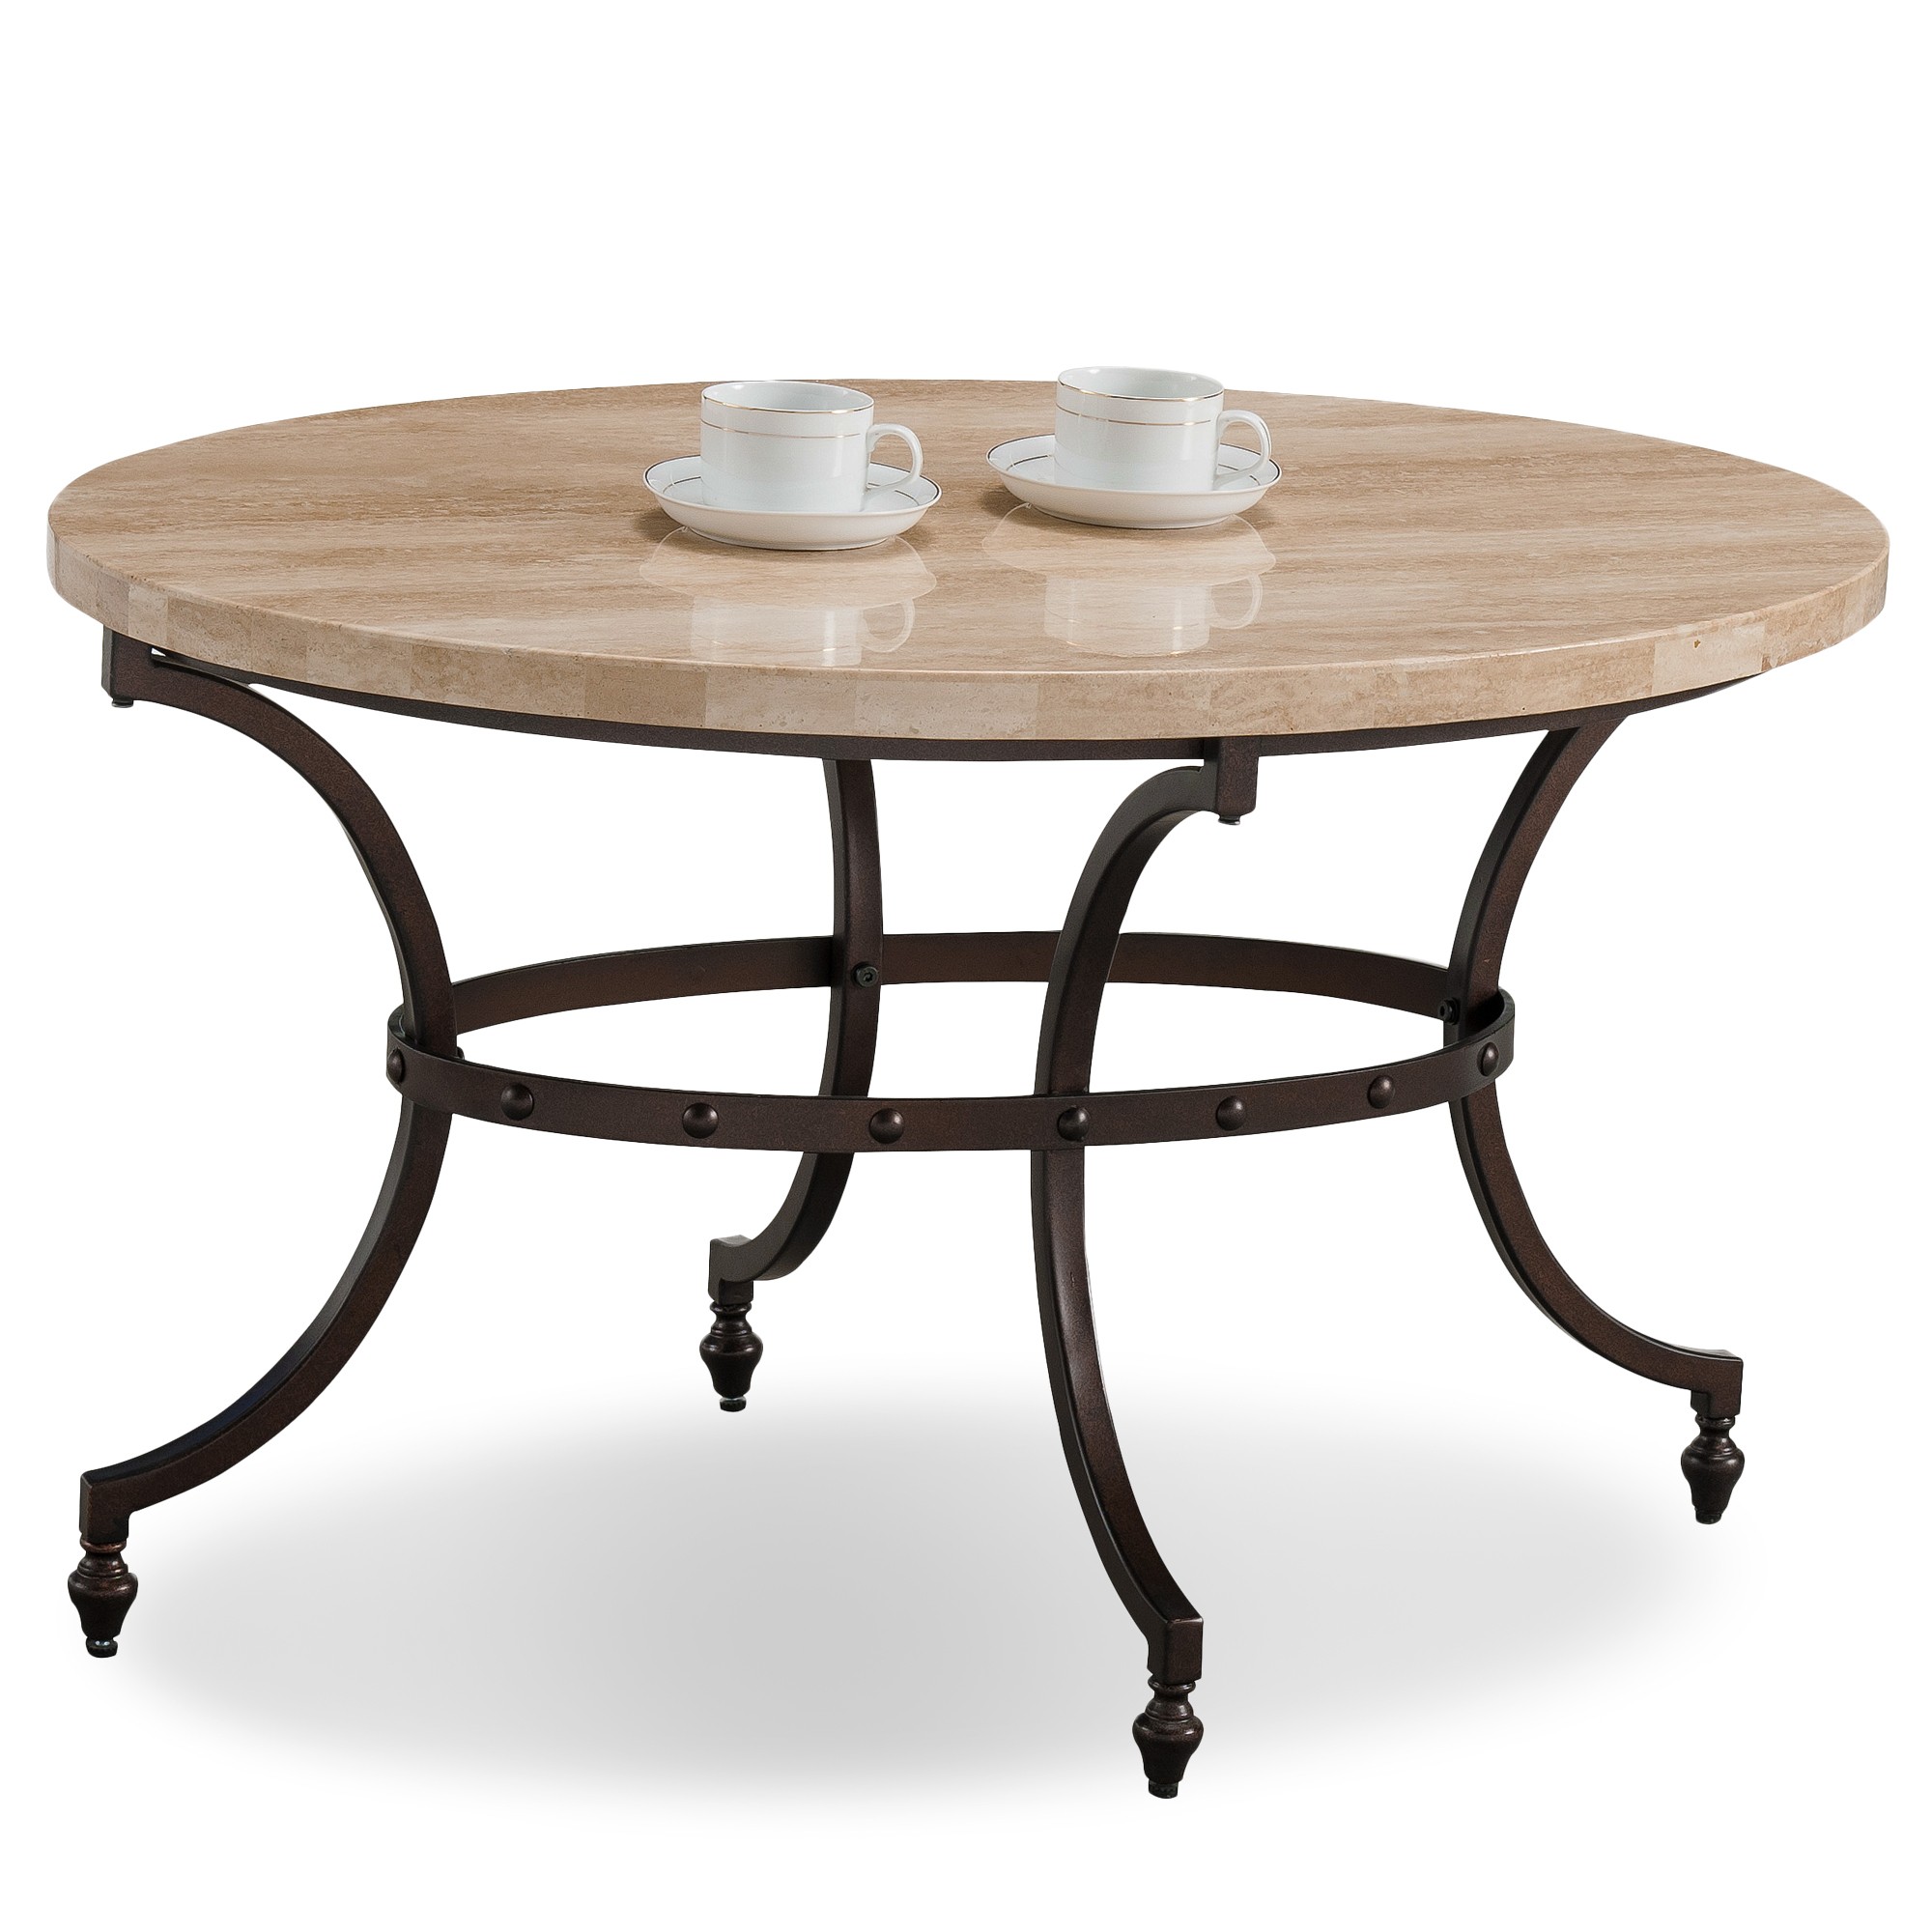 Oval travertine stone top coffee table with rubbed bronze 1